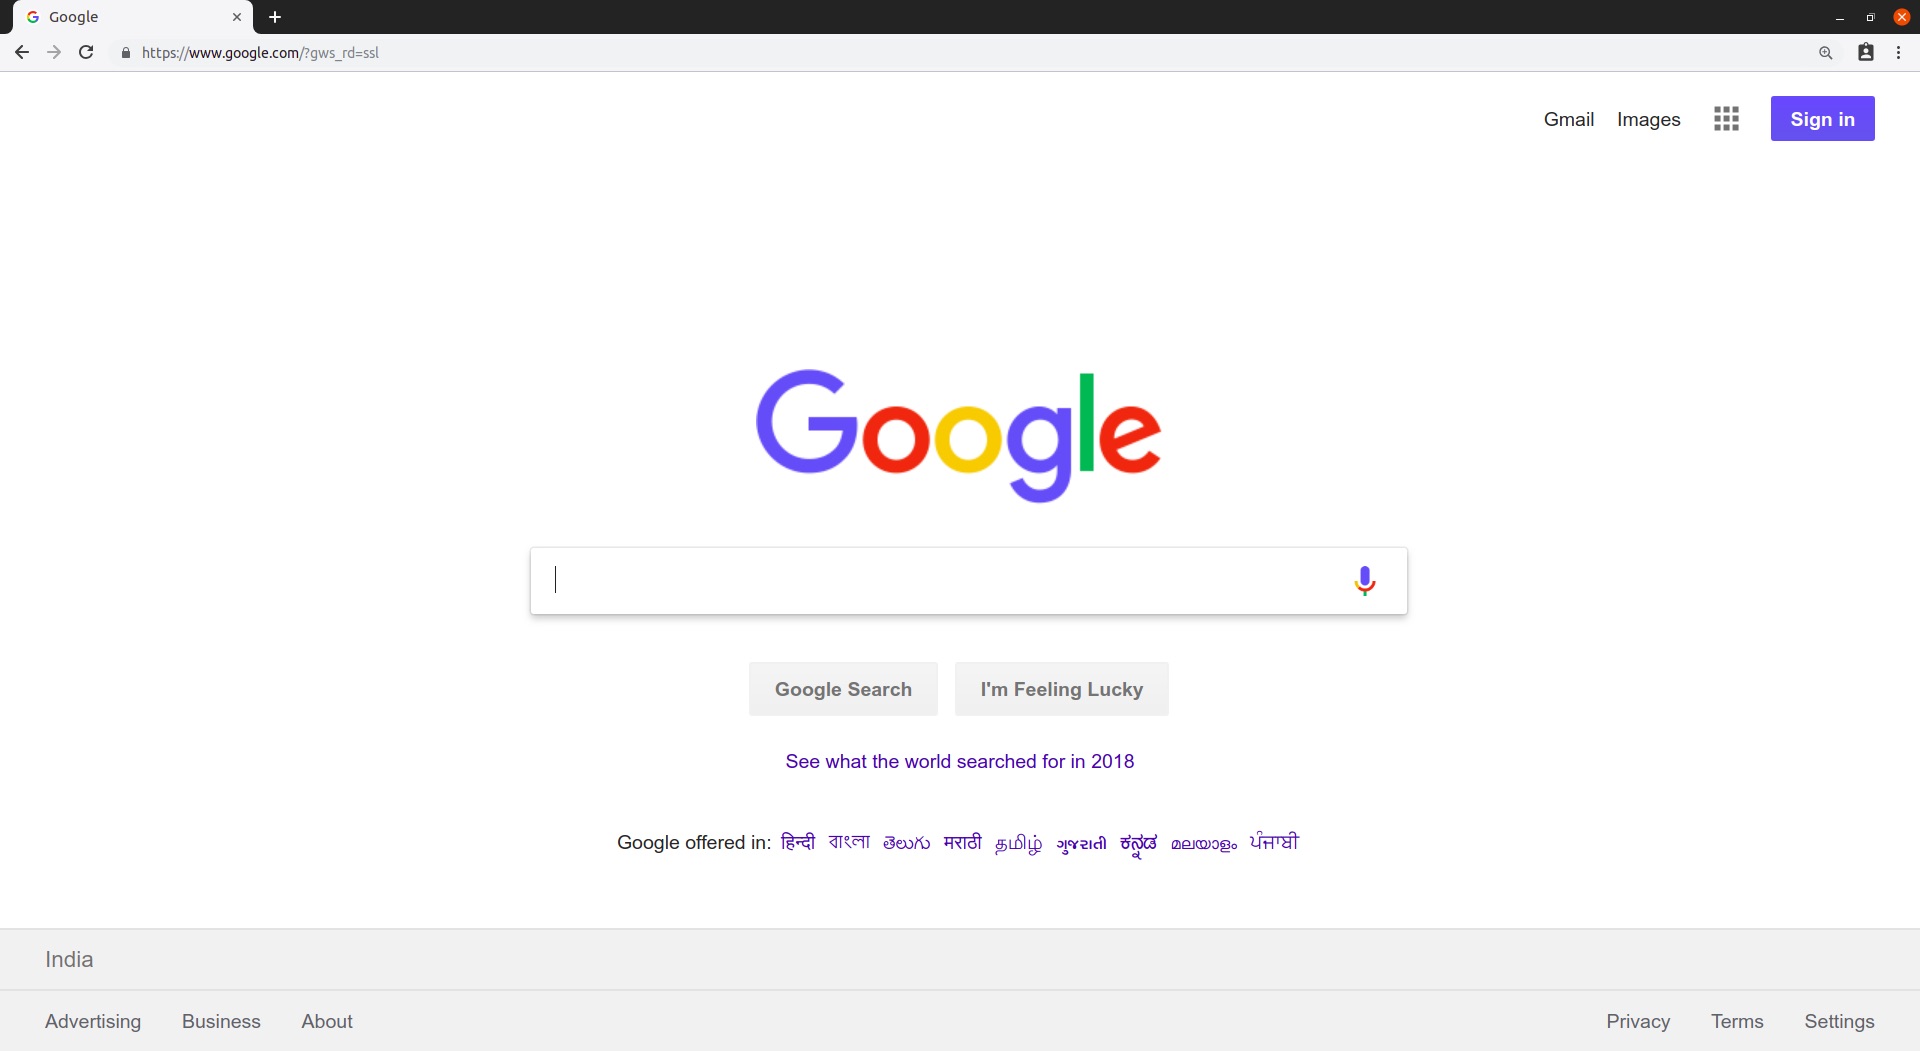 How To Change The Font Size On Google Chrome